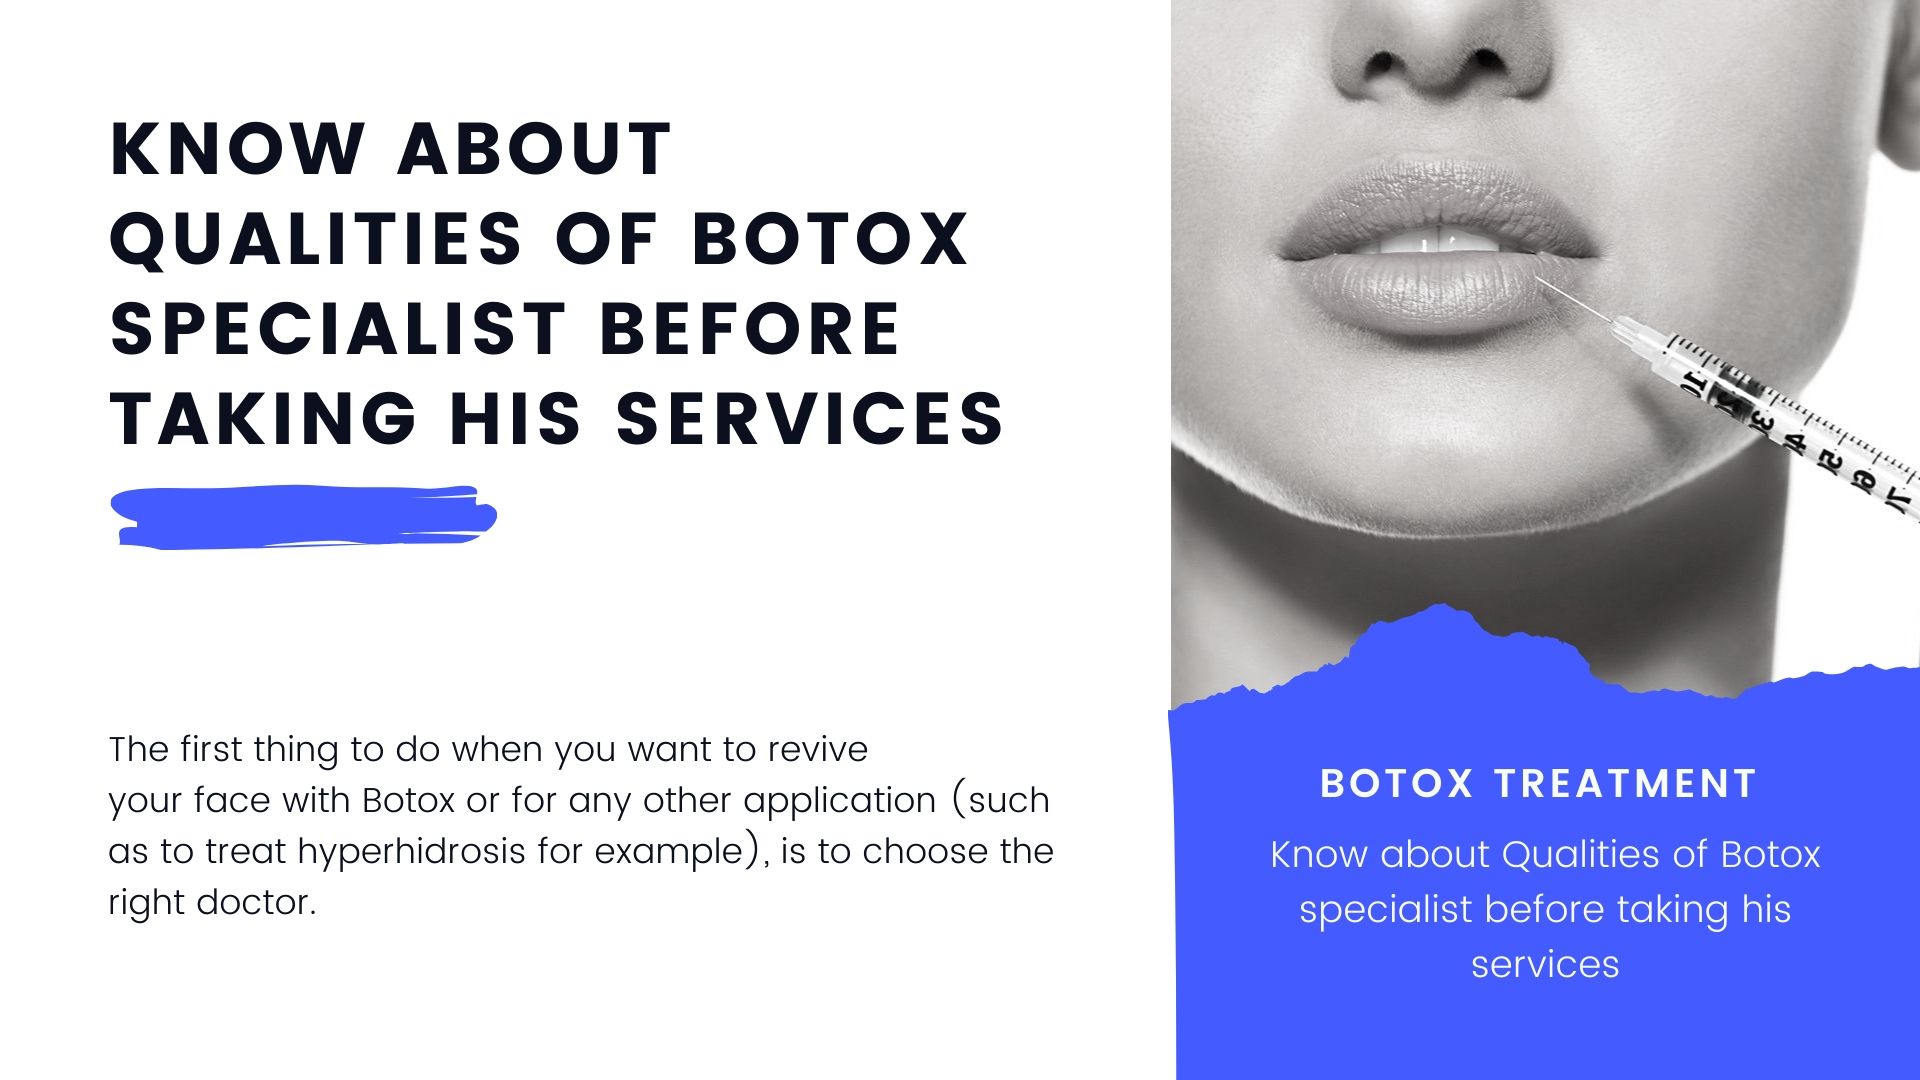 Botox specialist before taking his services - Jarret Morrow MD